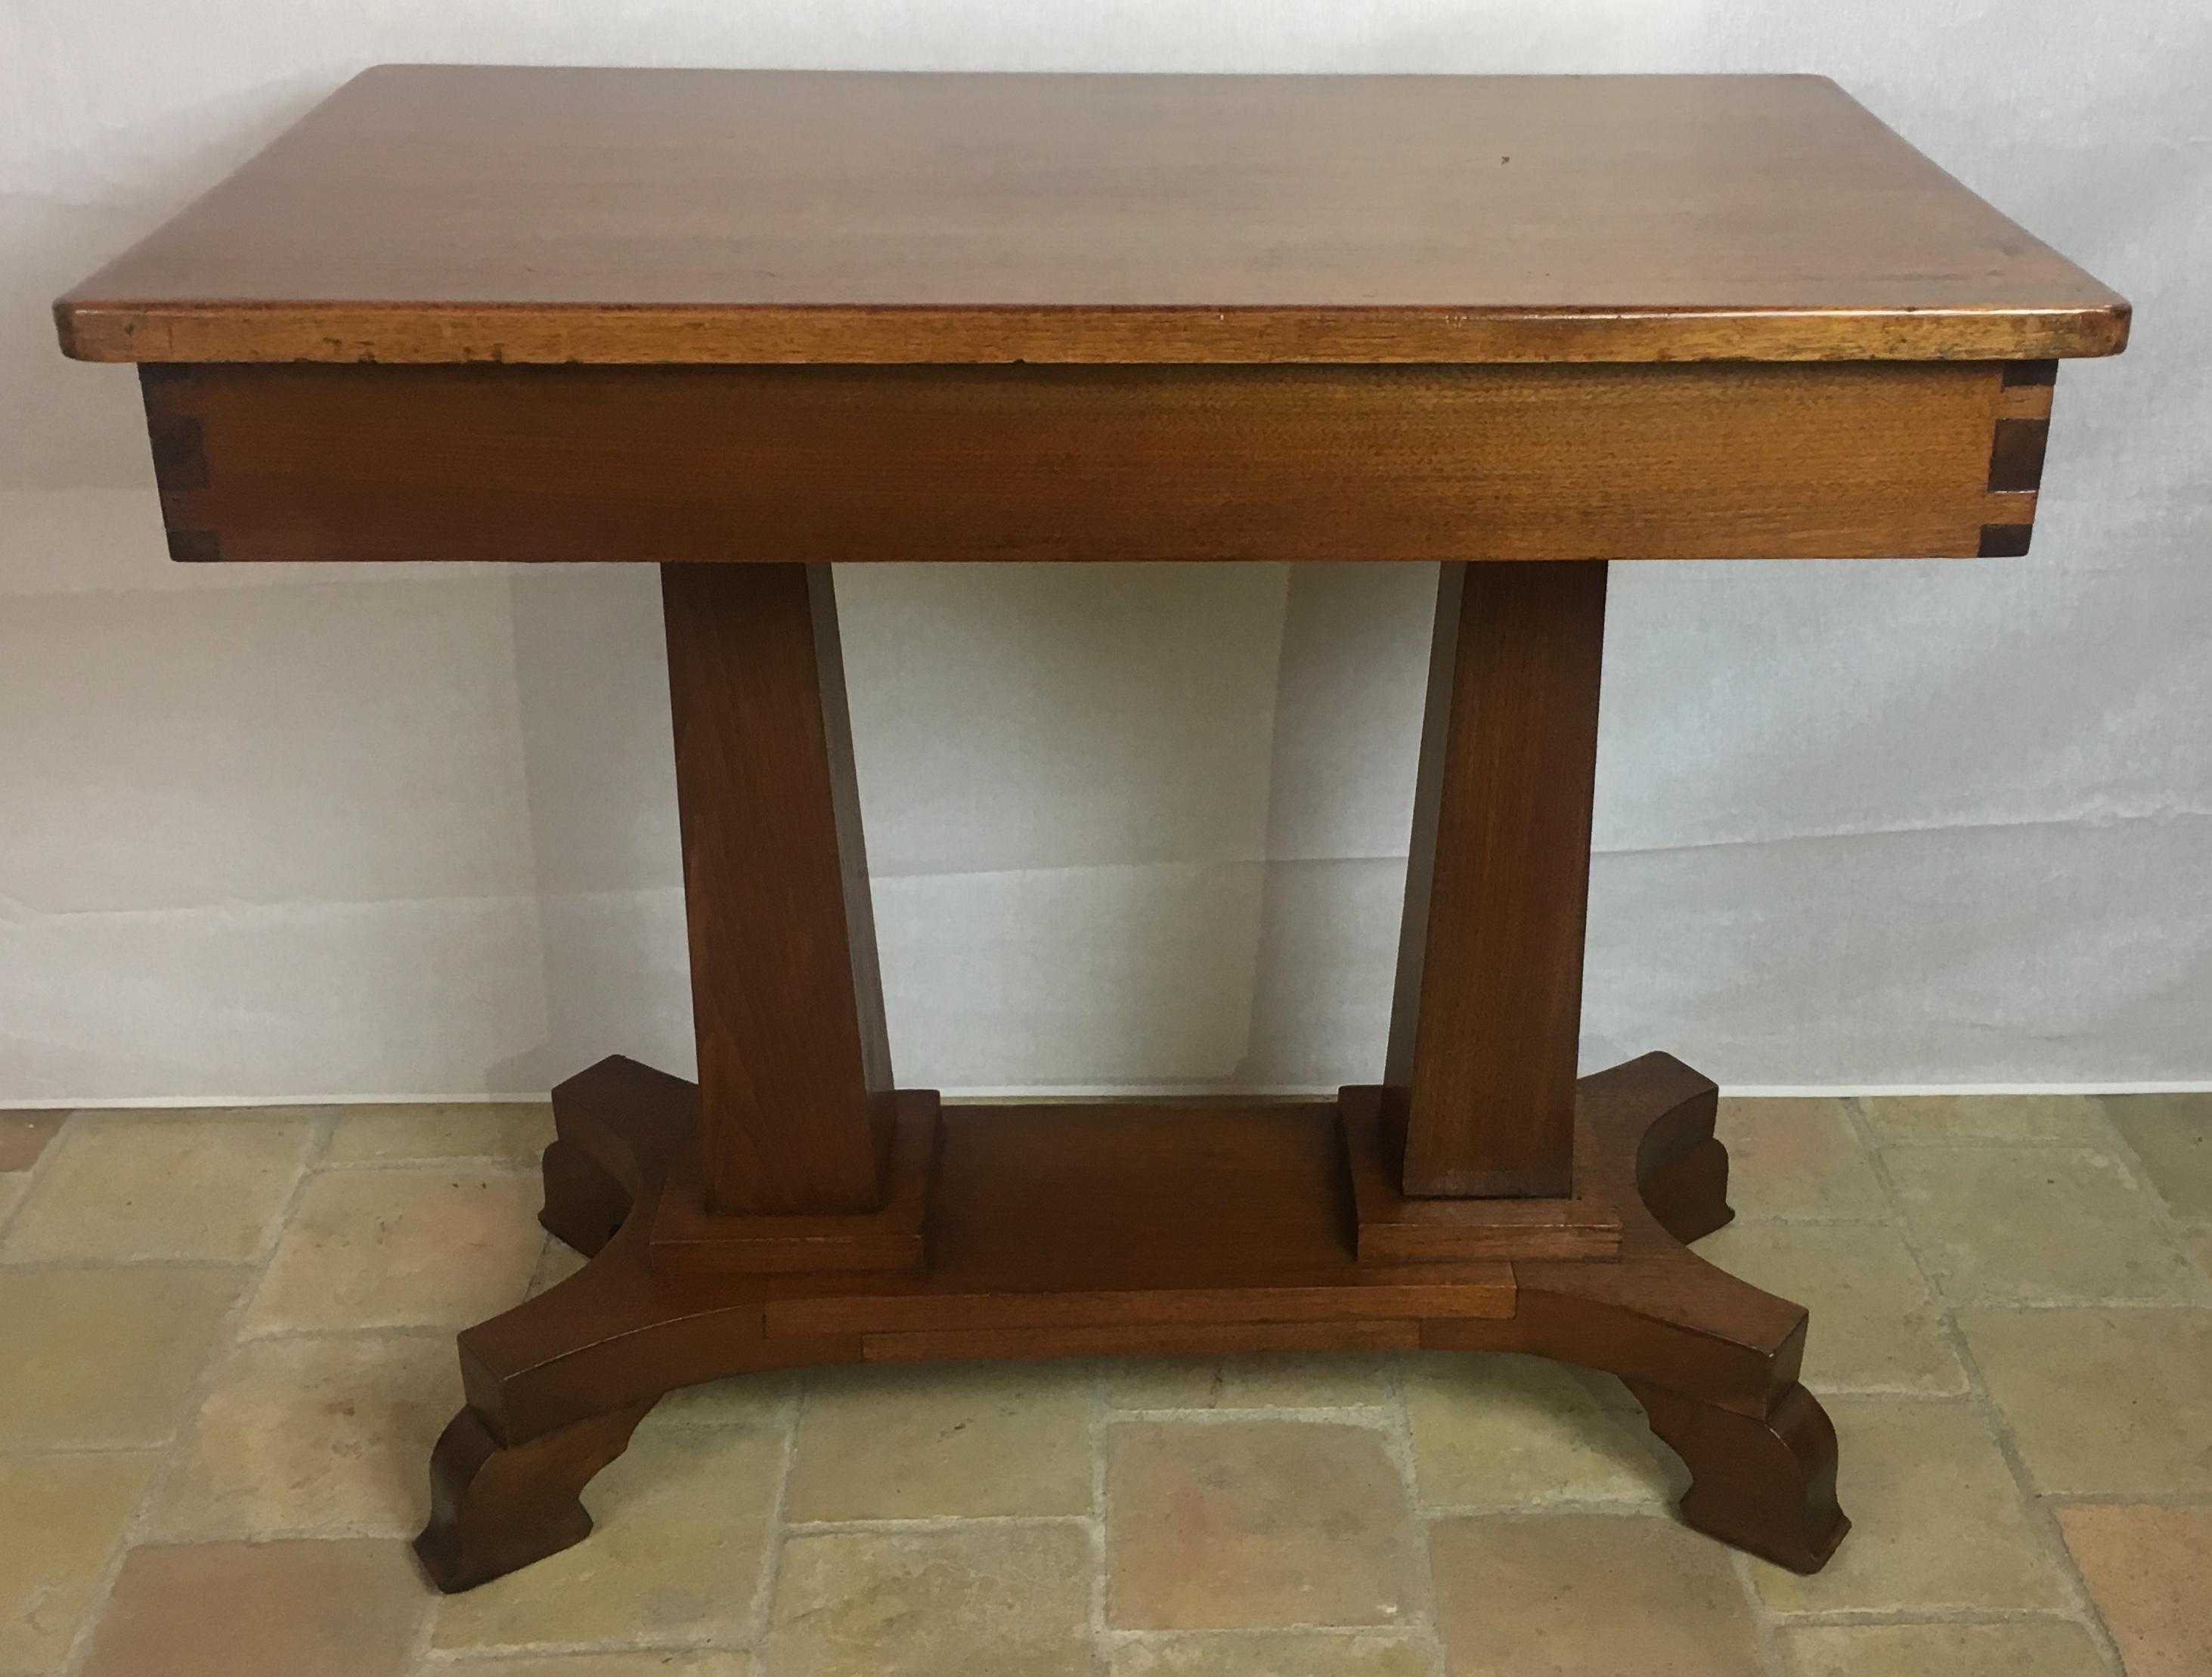 20th Century American Arts & Crafts Era Mahogany Side Table or Small Desk For Sale